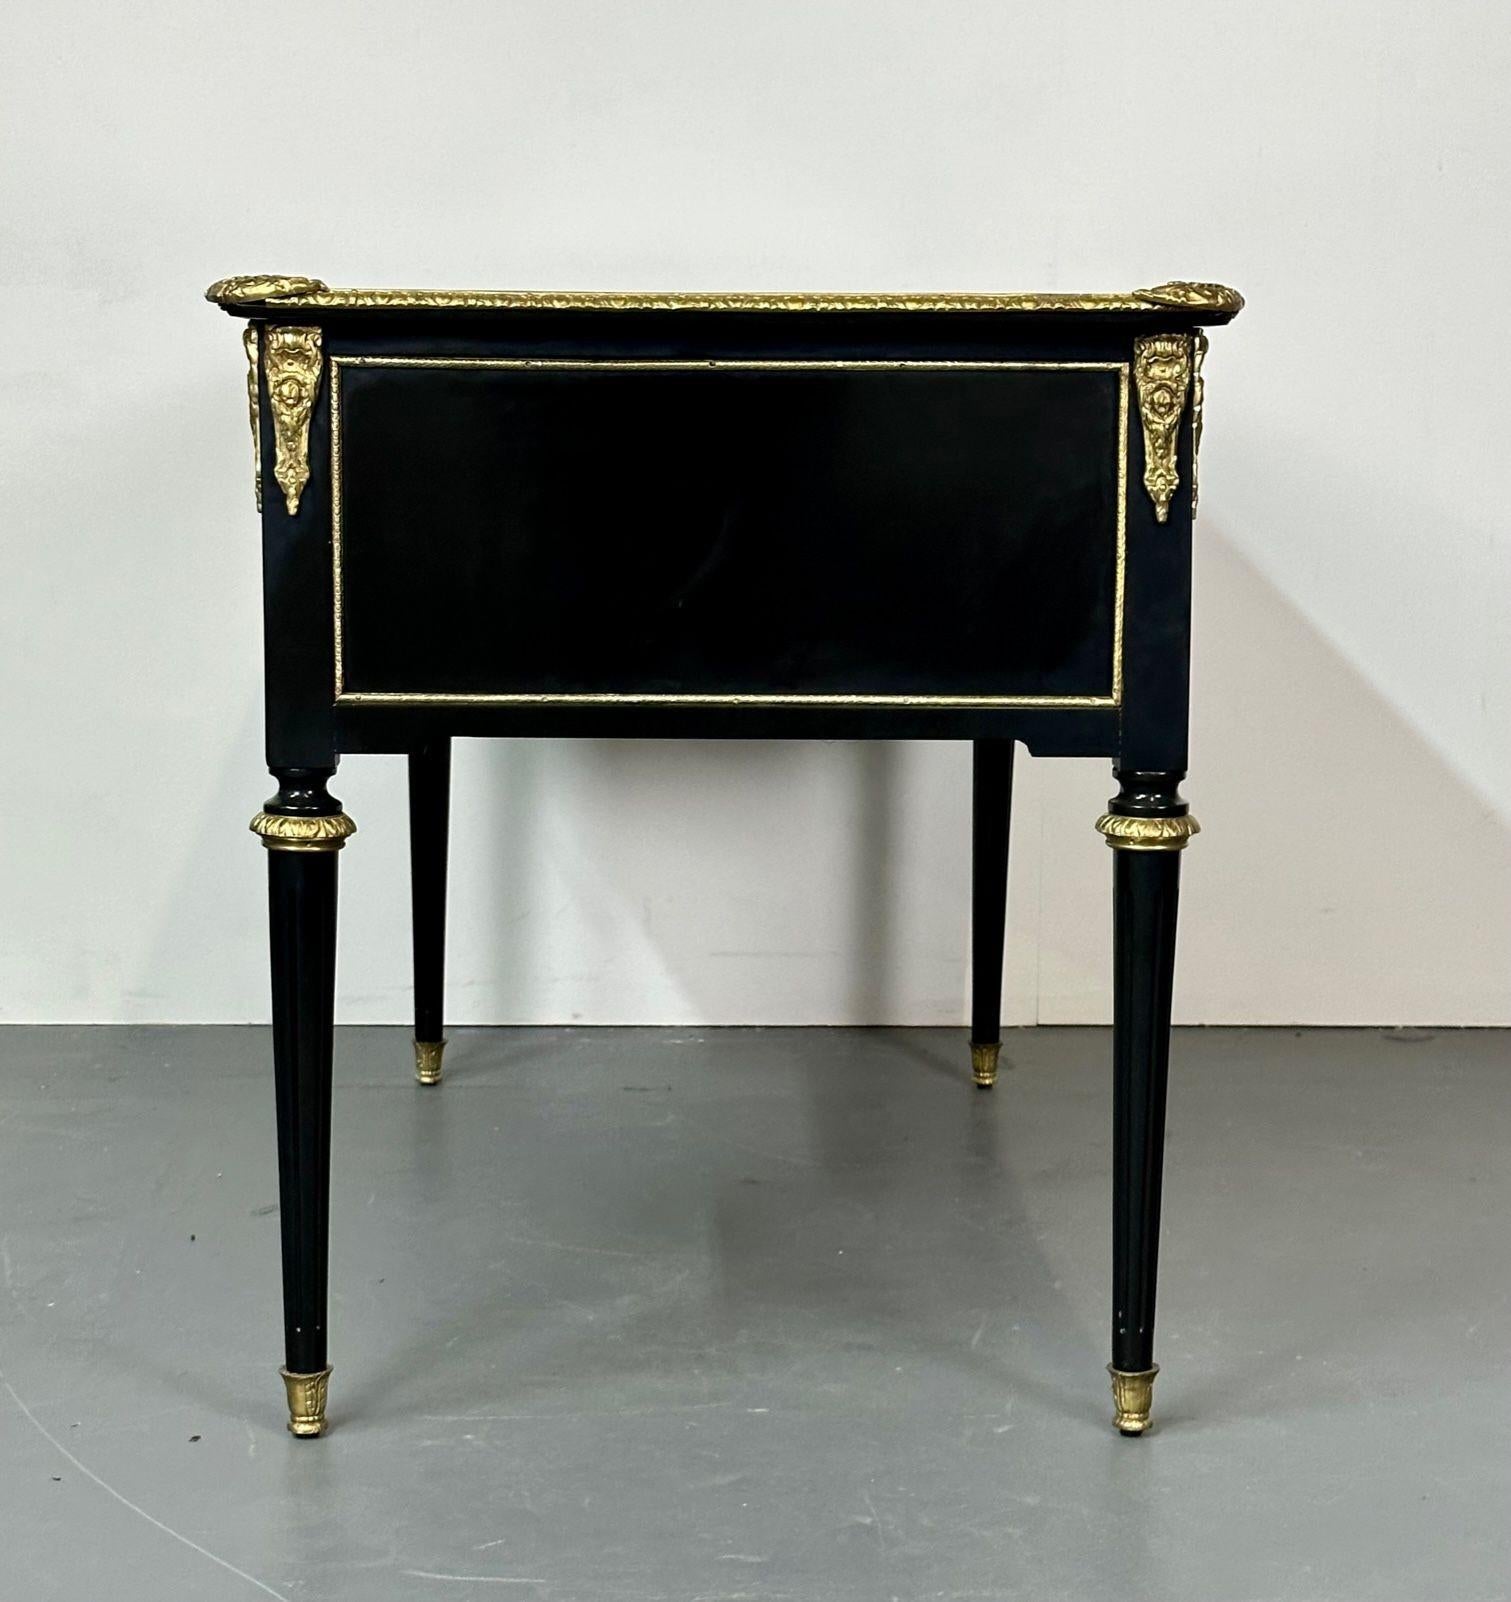 Hollywood Regency Ebony Desk, Writing Table or Vanity, Bronze Mounted, 1930s For Sale 2